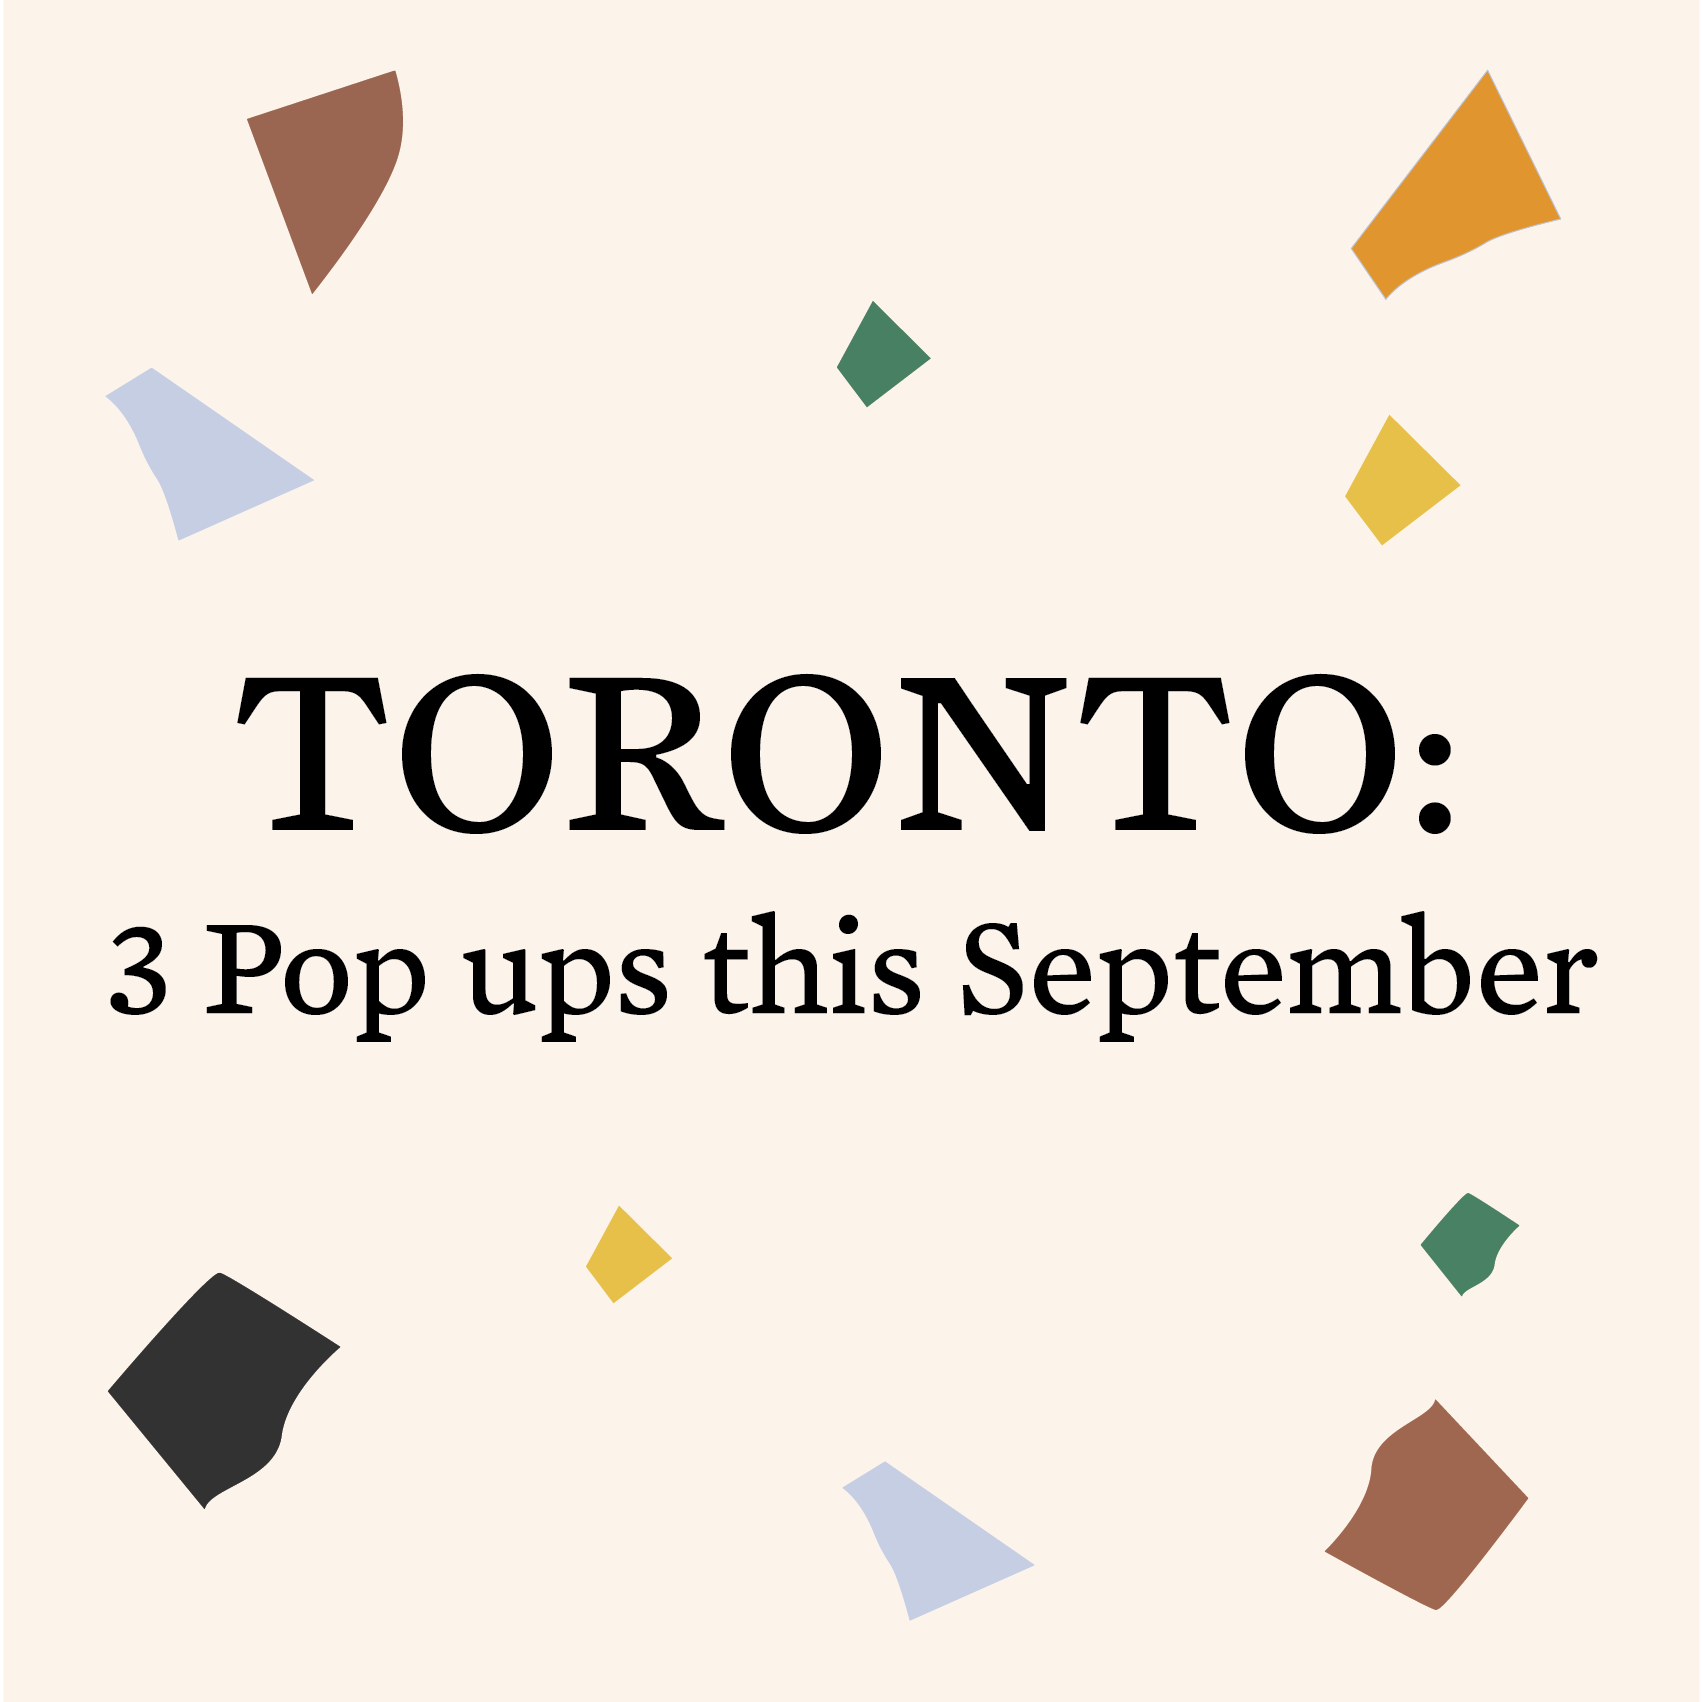 Save the date: Three Pop-ups in Toronto!